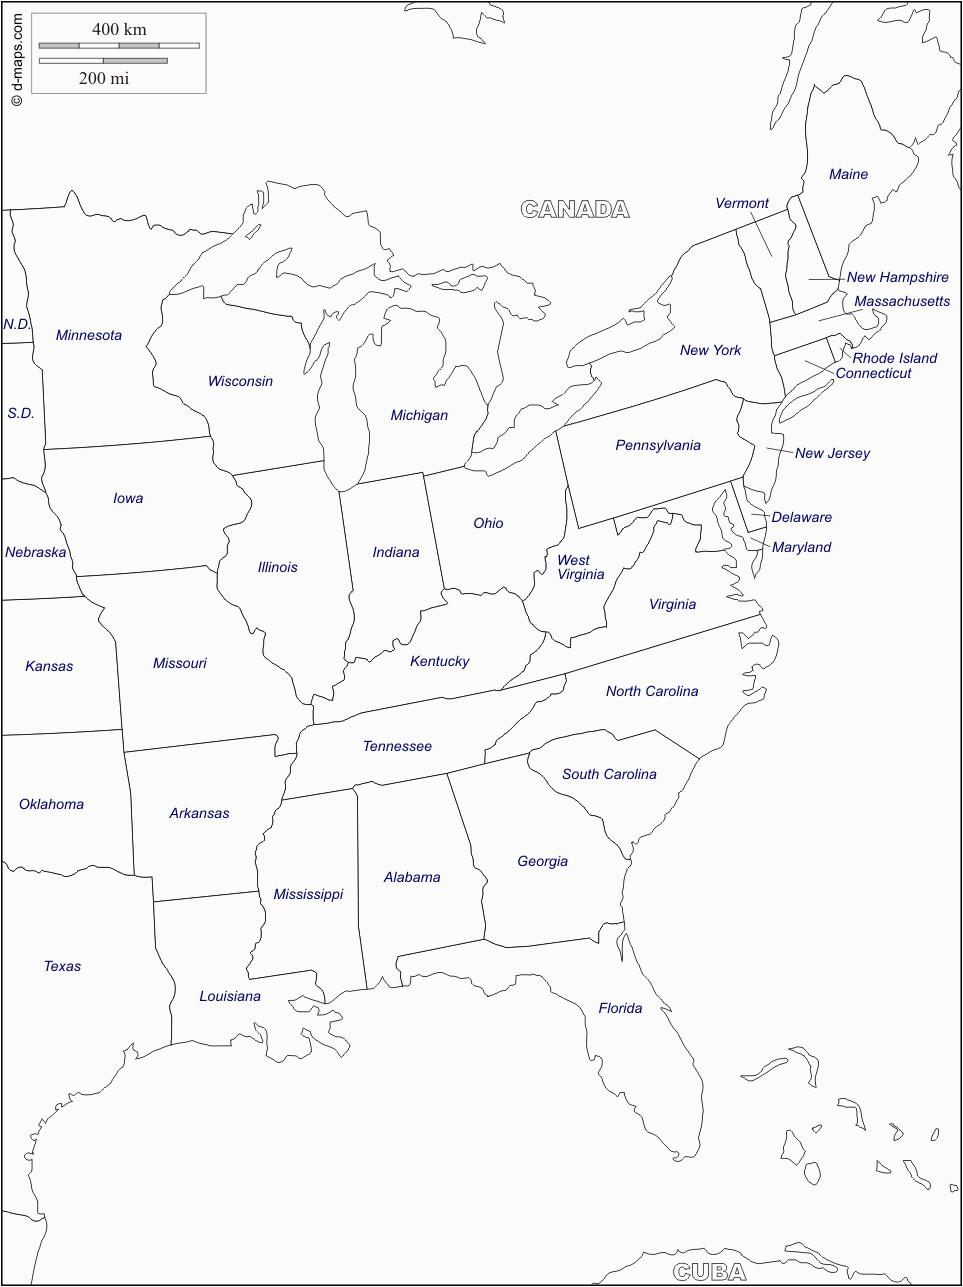 east coast of the united states free map free blank map free